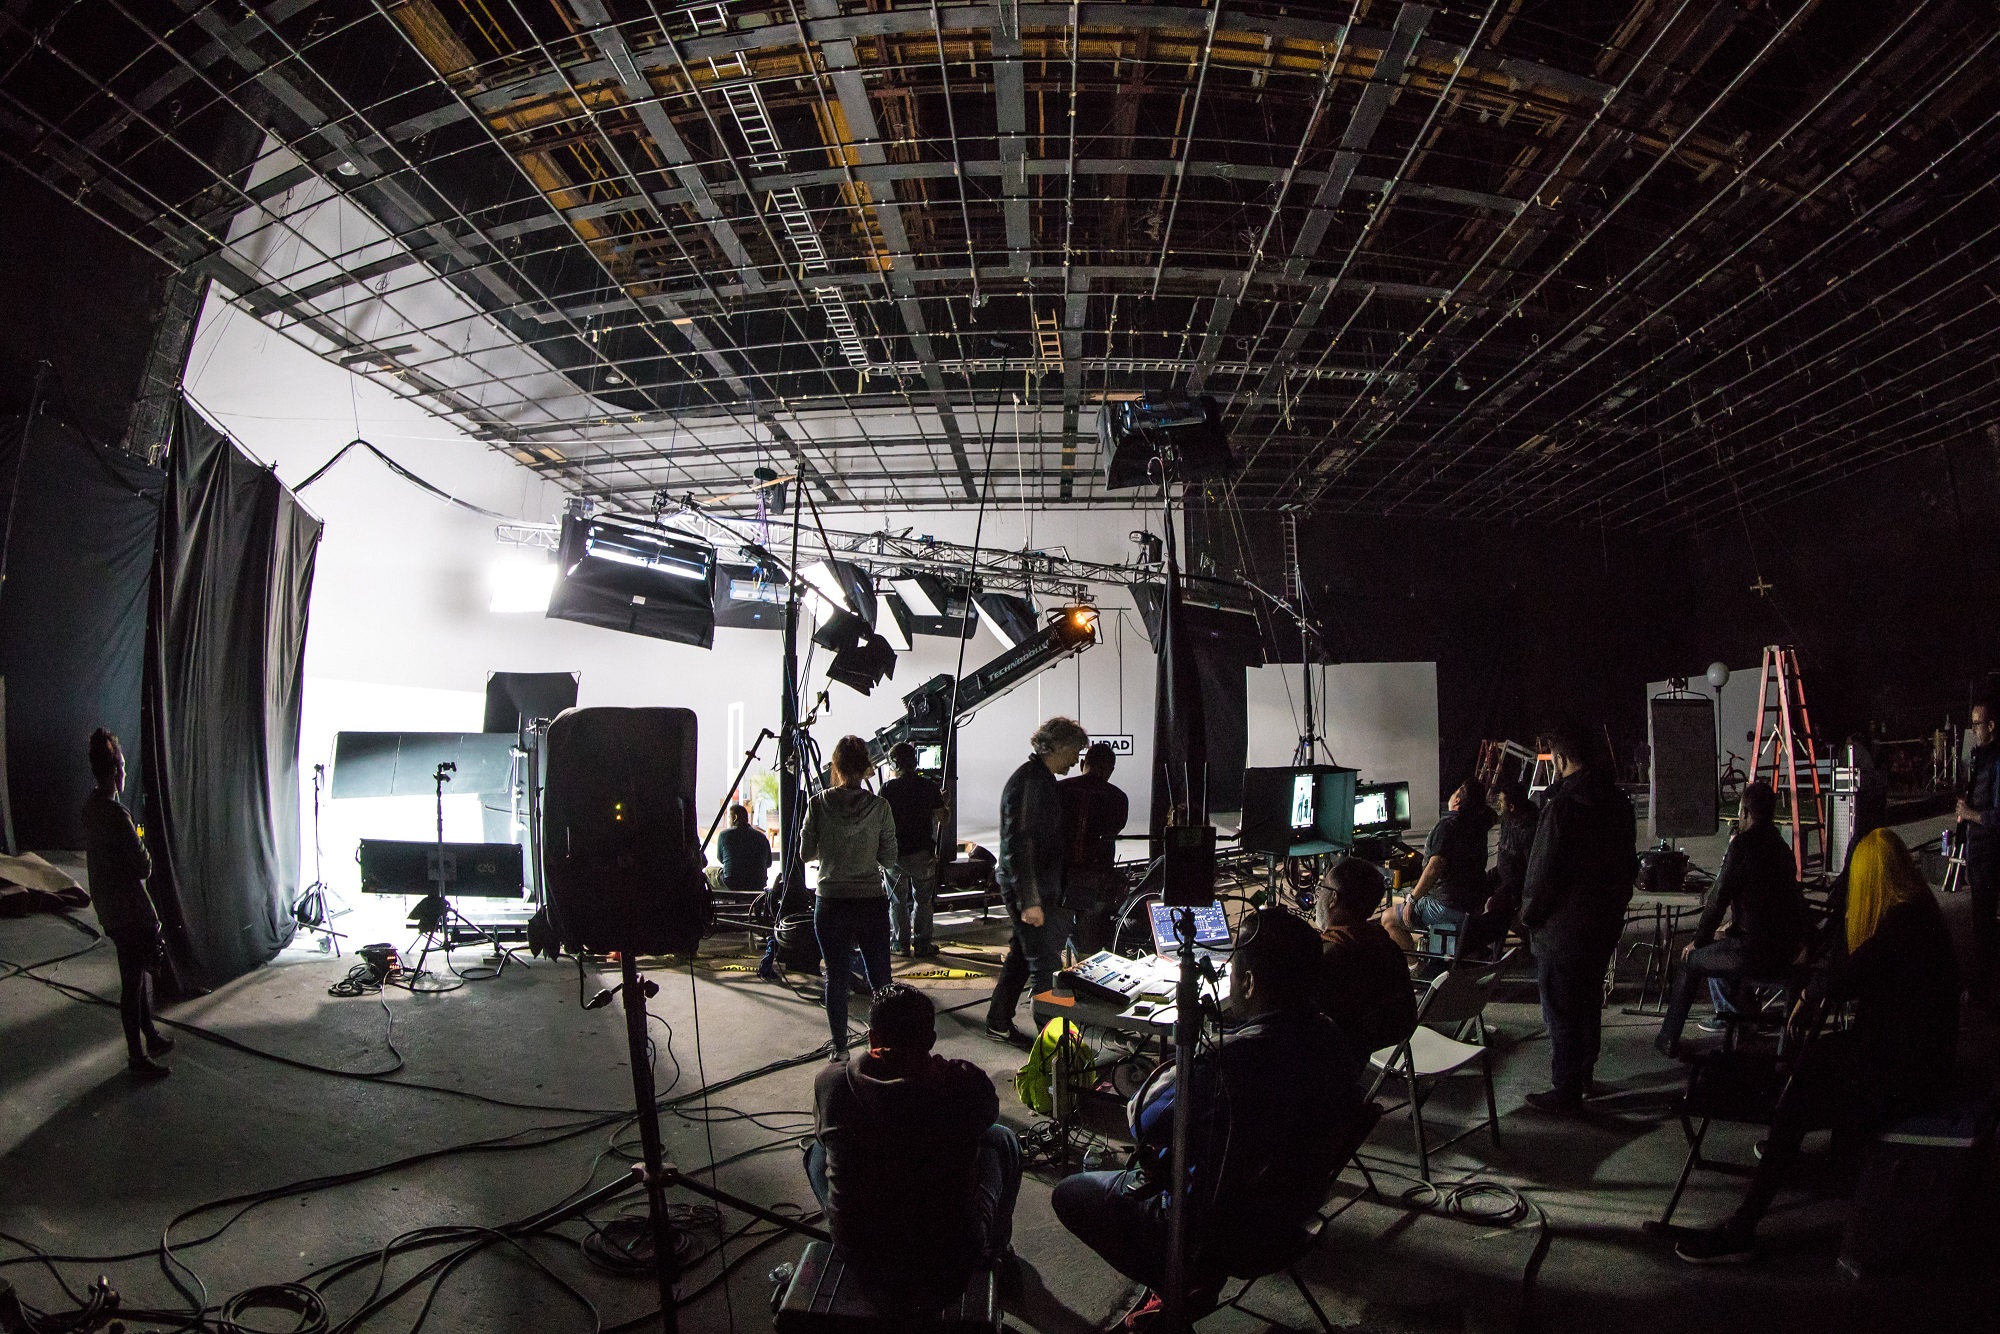 A wide shot of a movie production set with cameras, crews, and monitors inside of a large warehouse space for the Red Production blog.